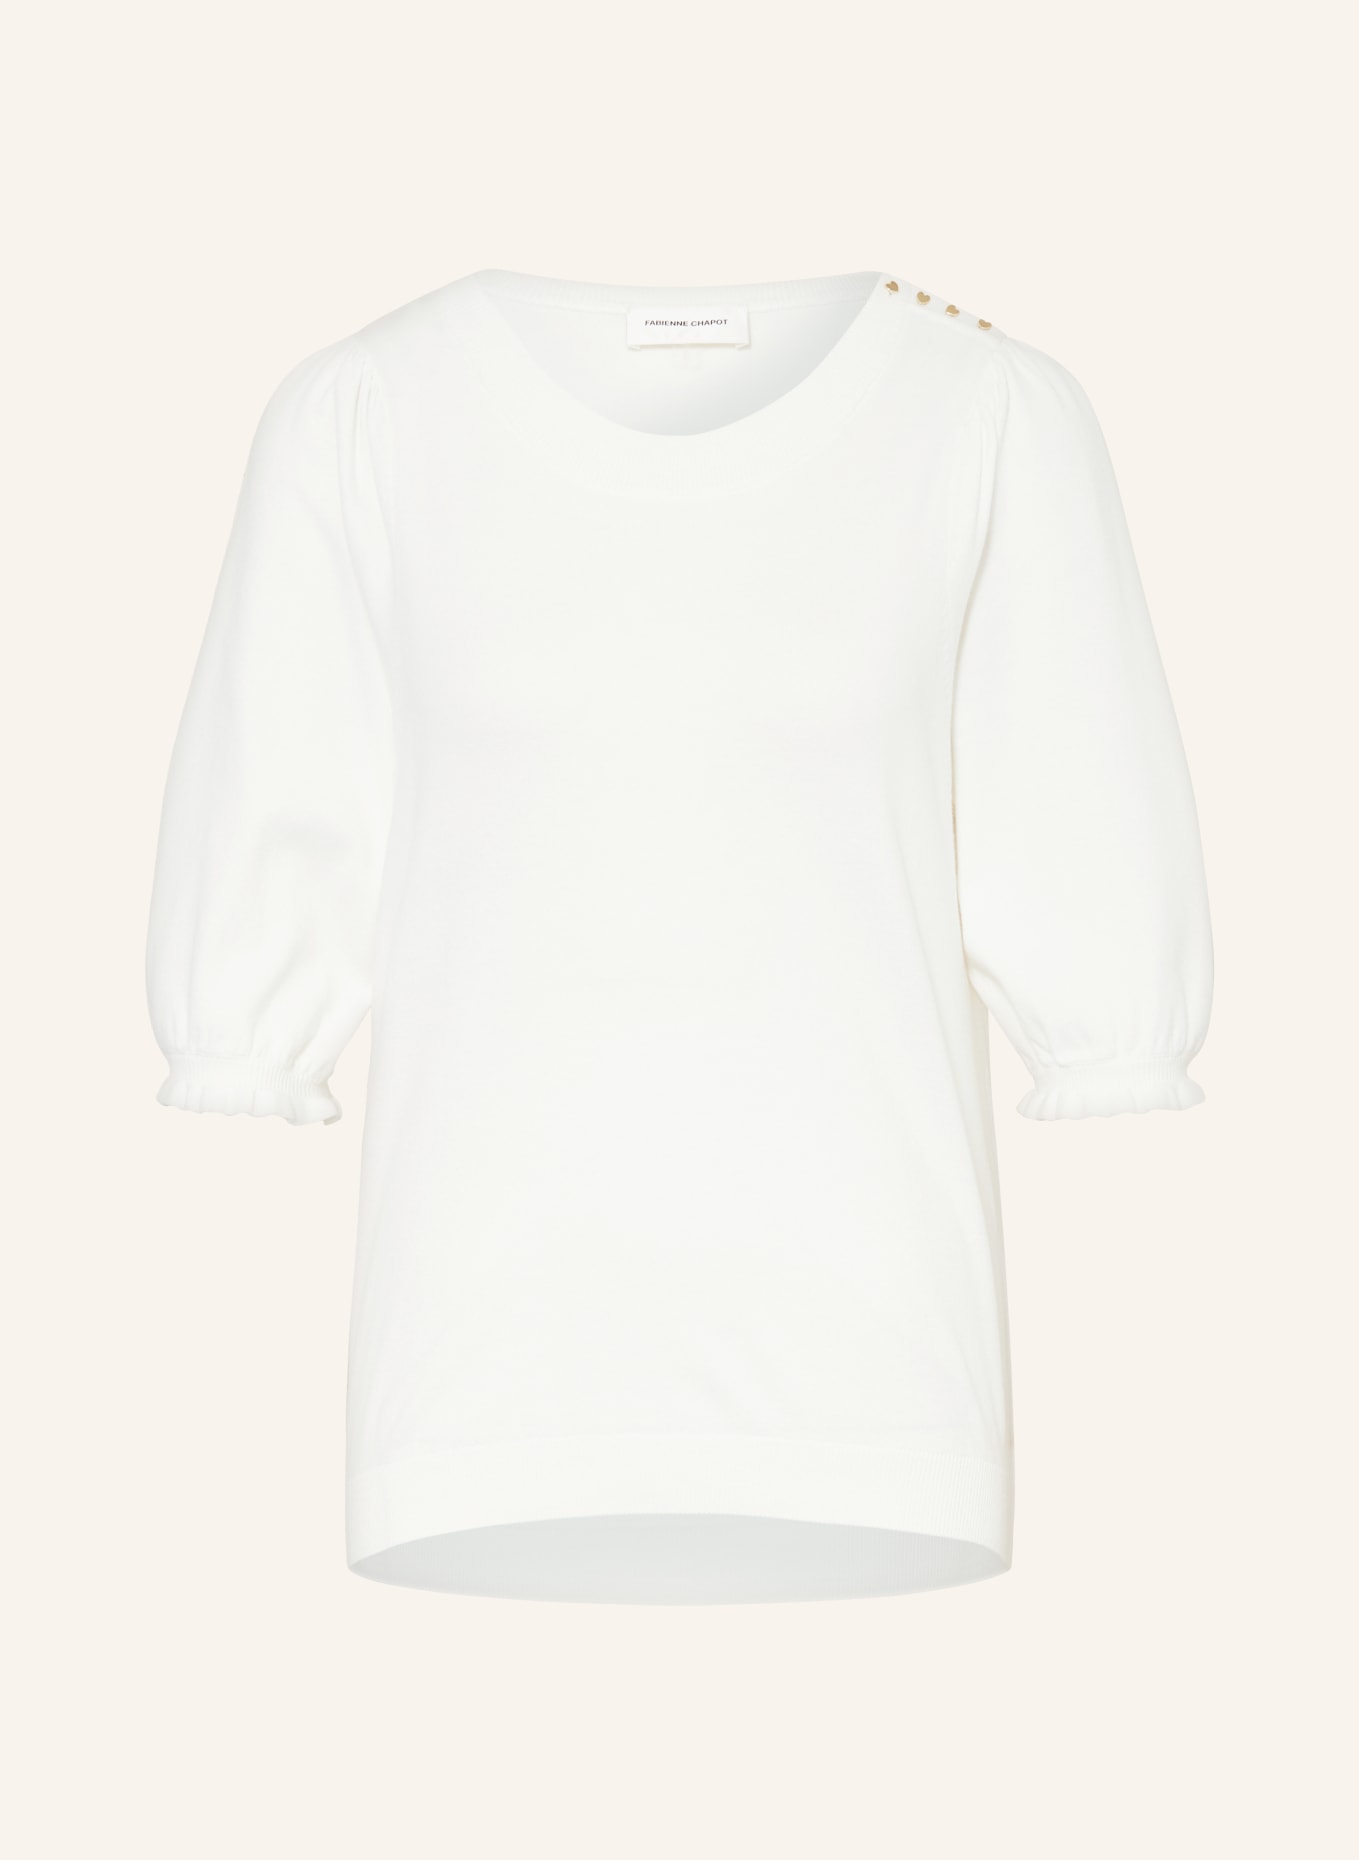 FABIENNE CHAPOT Pullover MILLY, Farbe: WEISS (Bild 1)